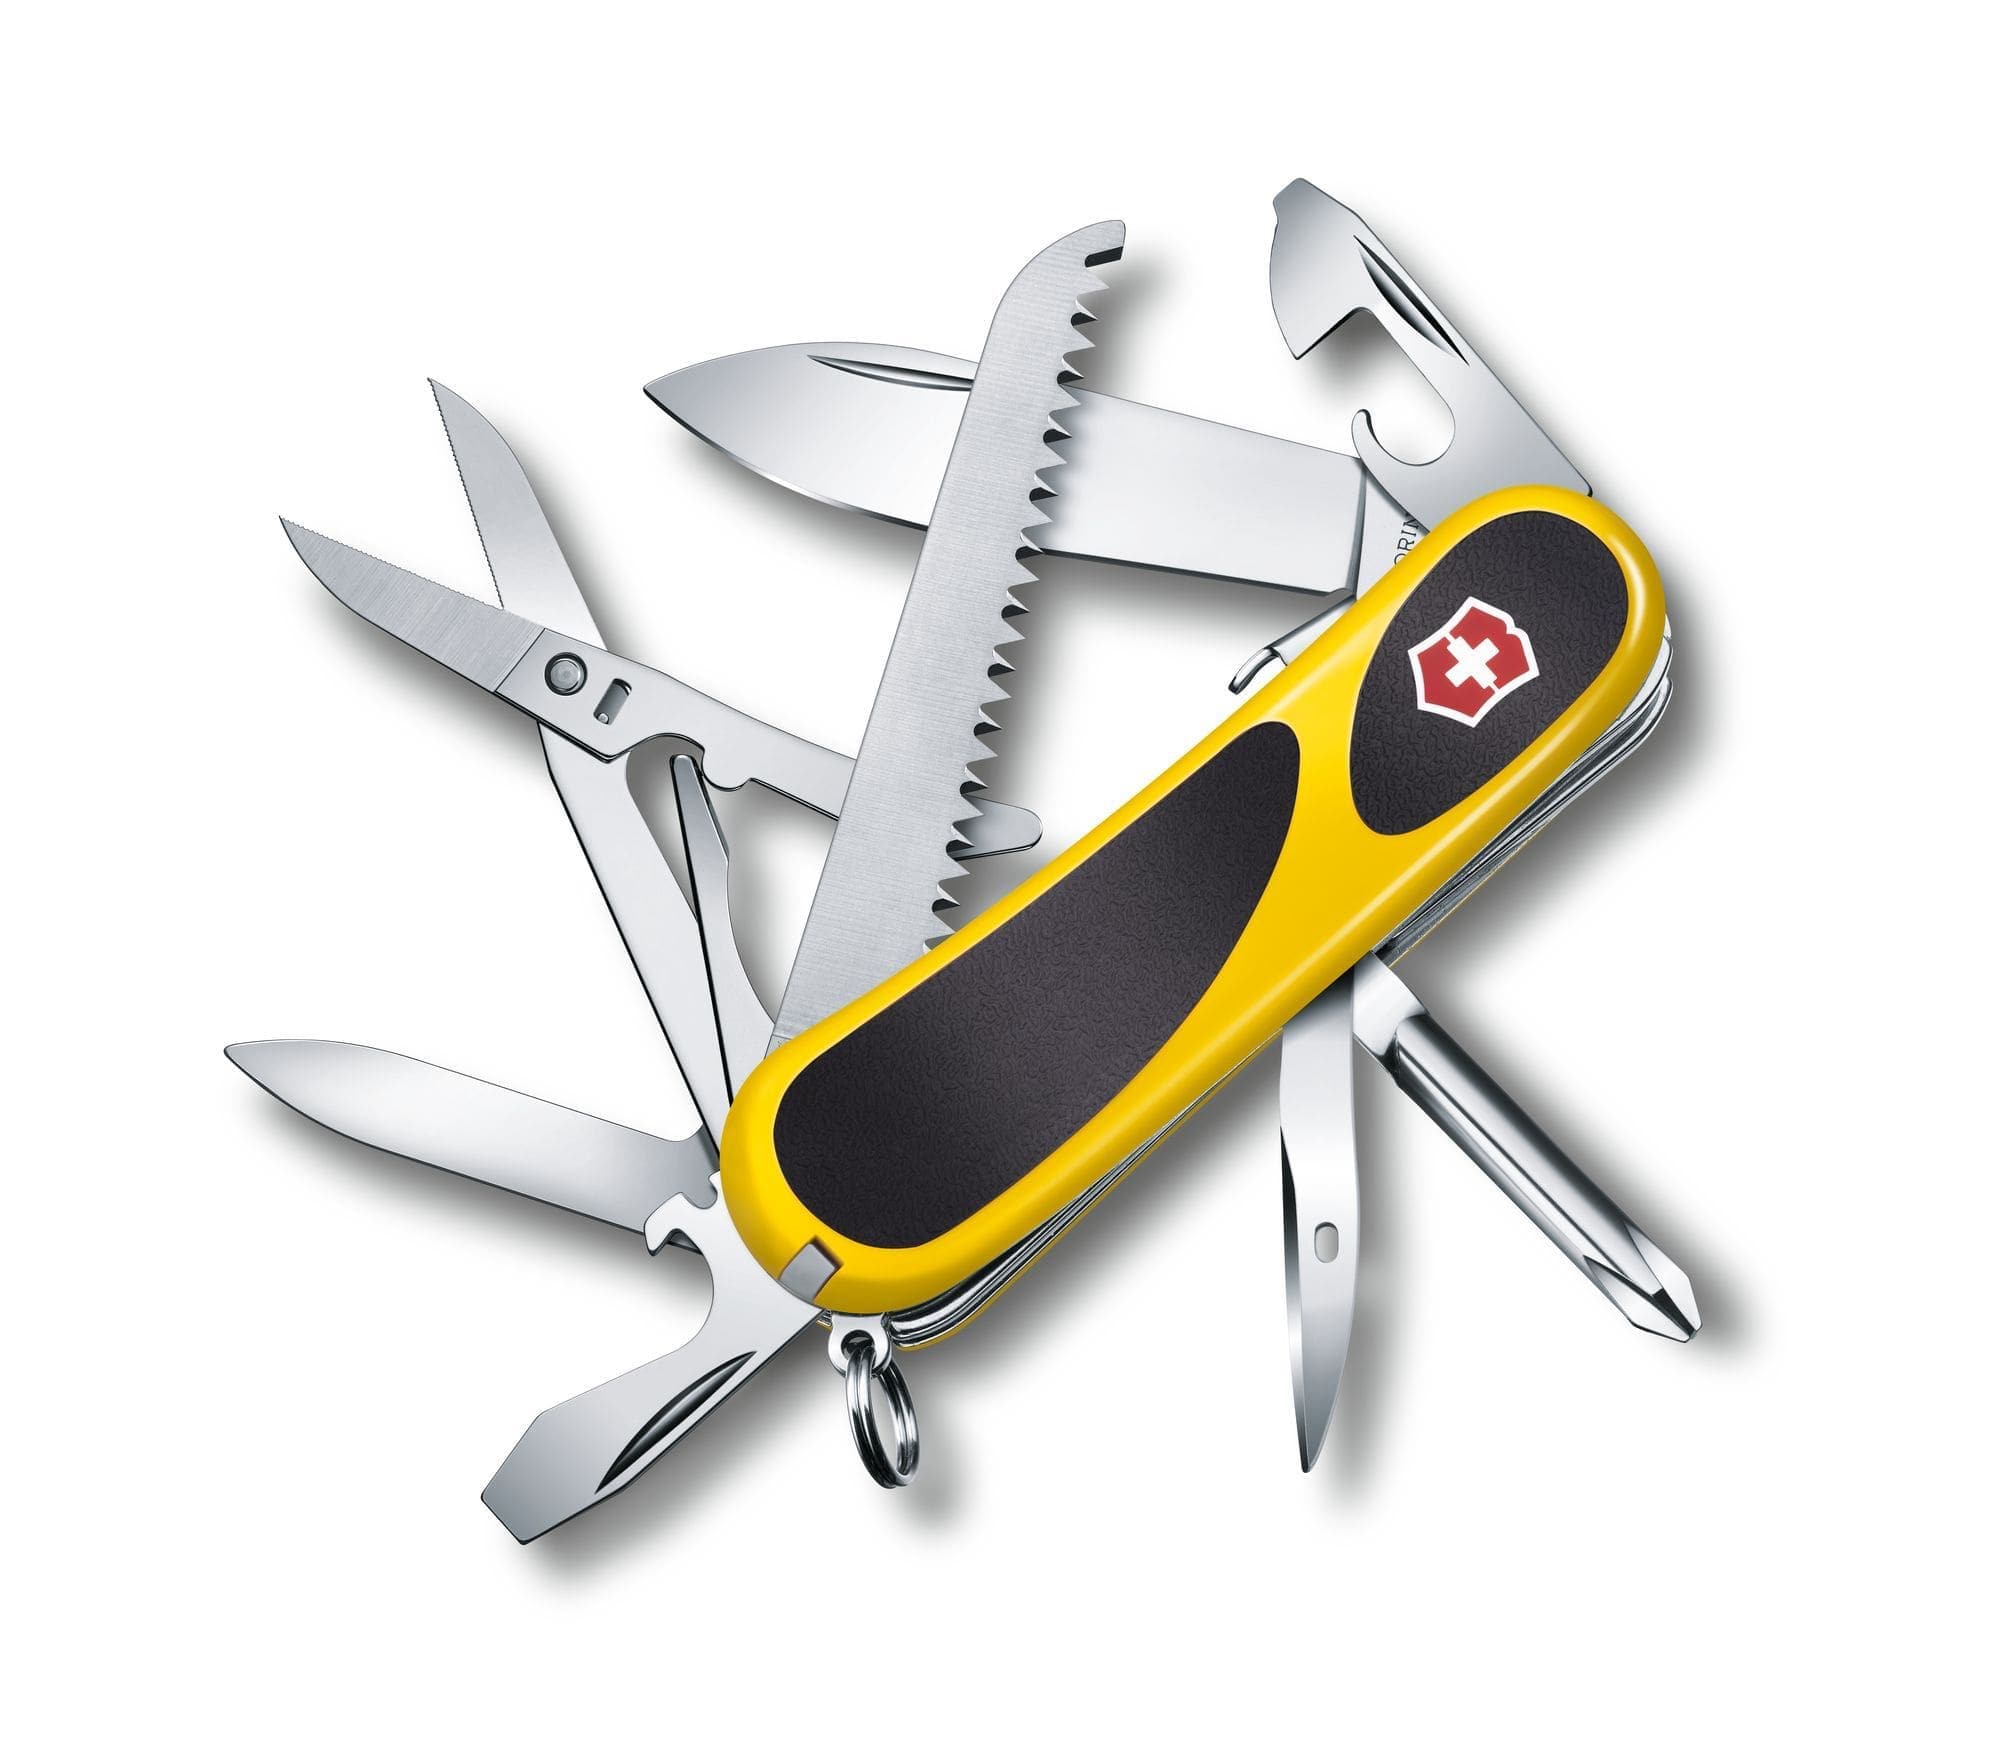 VICTORINOX SWISS ARMY KNIFE EVOGRIP S18 YELLOW/BLACK WITH 15 FUNCTIONS - 2.4913.SC8